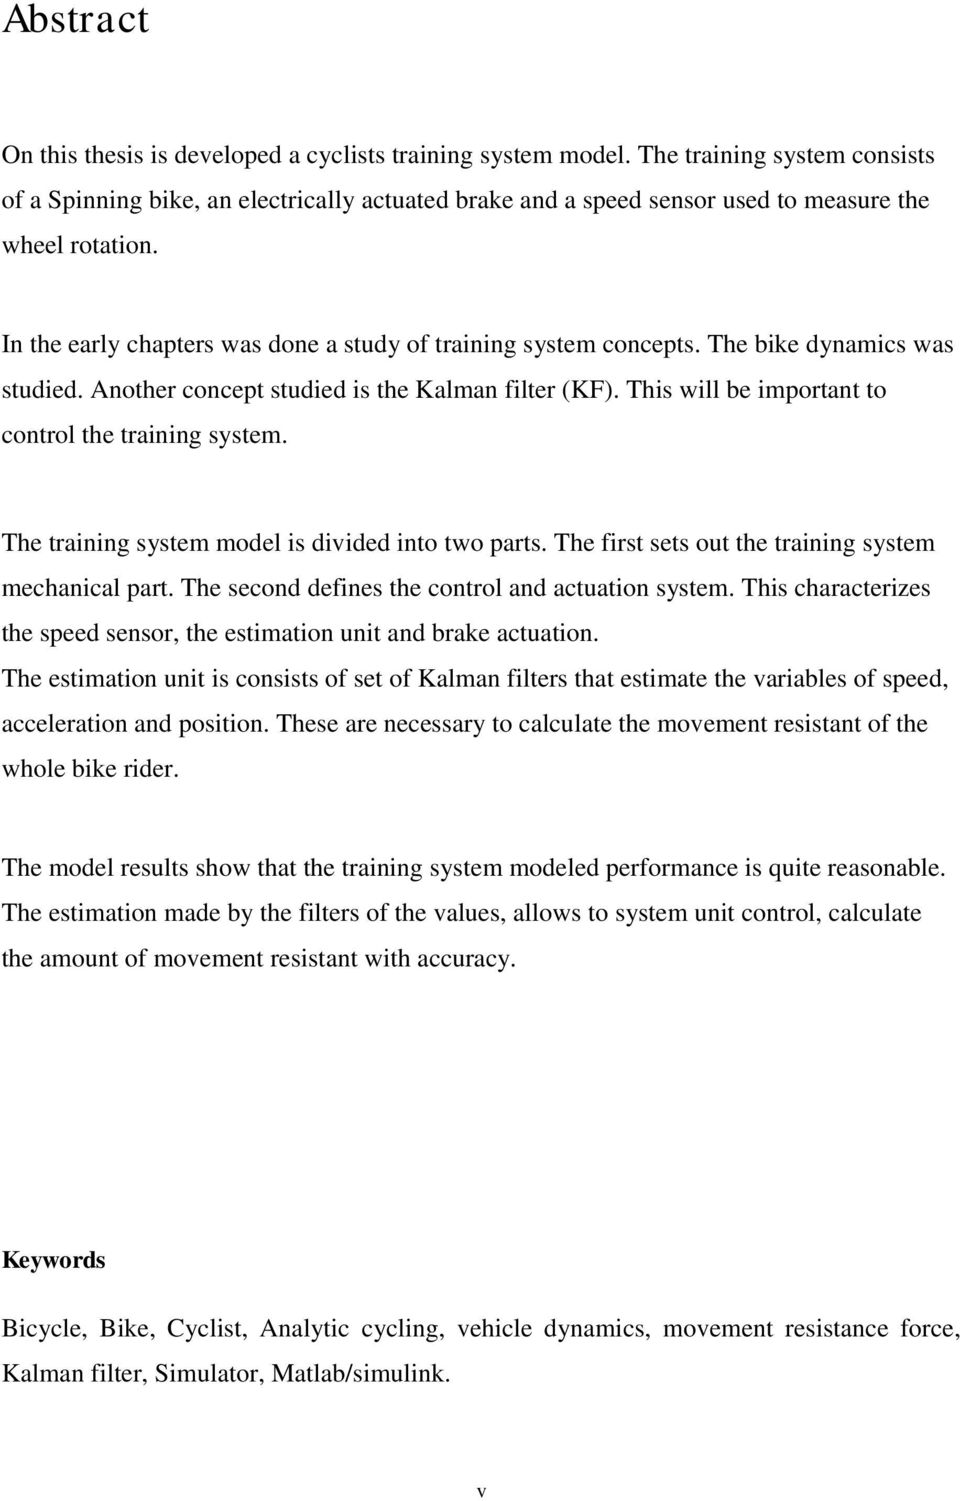 The bie dynamics was studied. Another concept studied is the Kalman filter (KF). This will be important to control the training system. The training system model is divided into two parts.